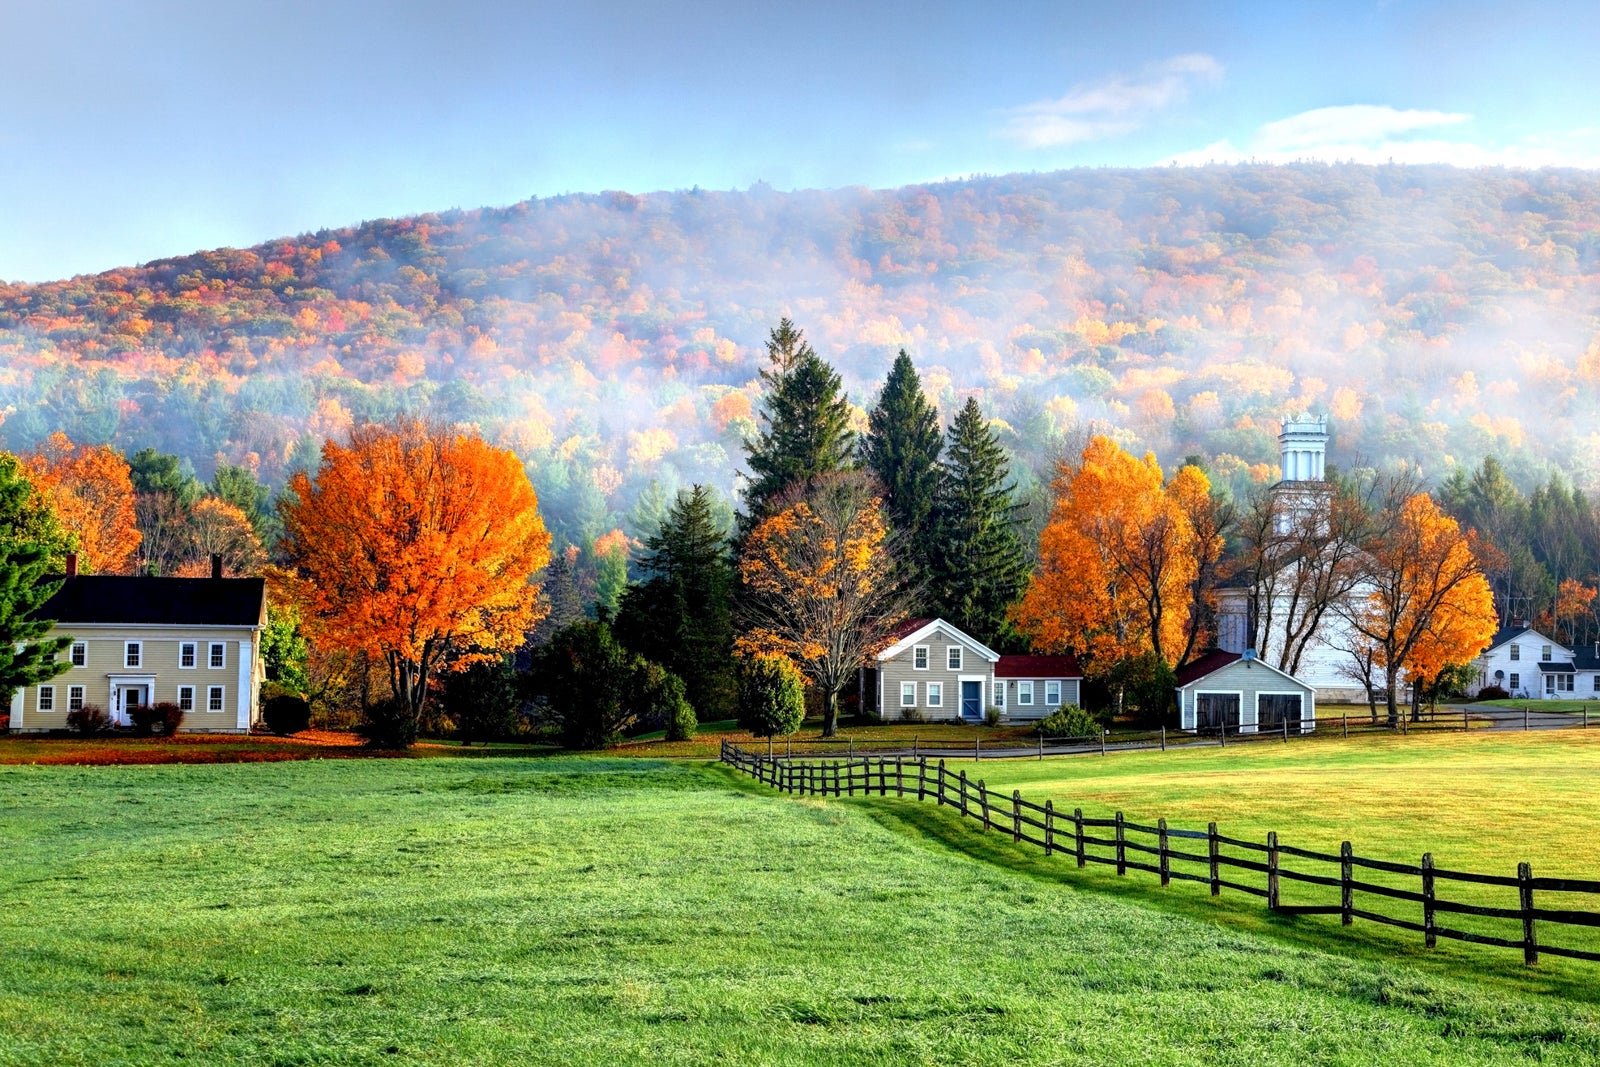 Autumn mist in the village of Tyringham in the Berkshires